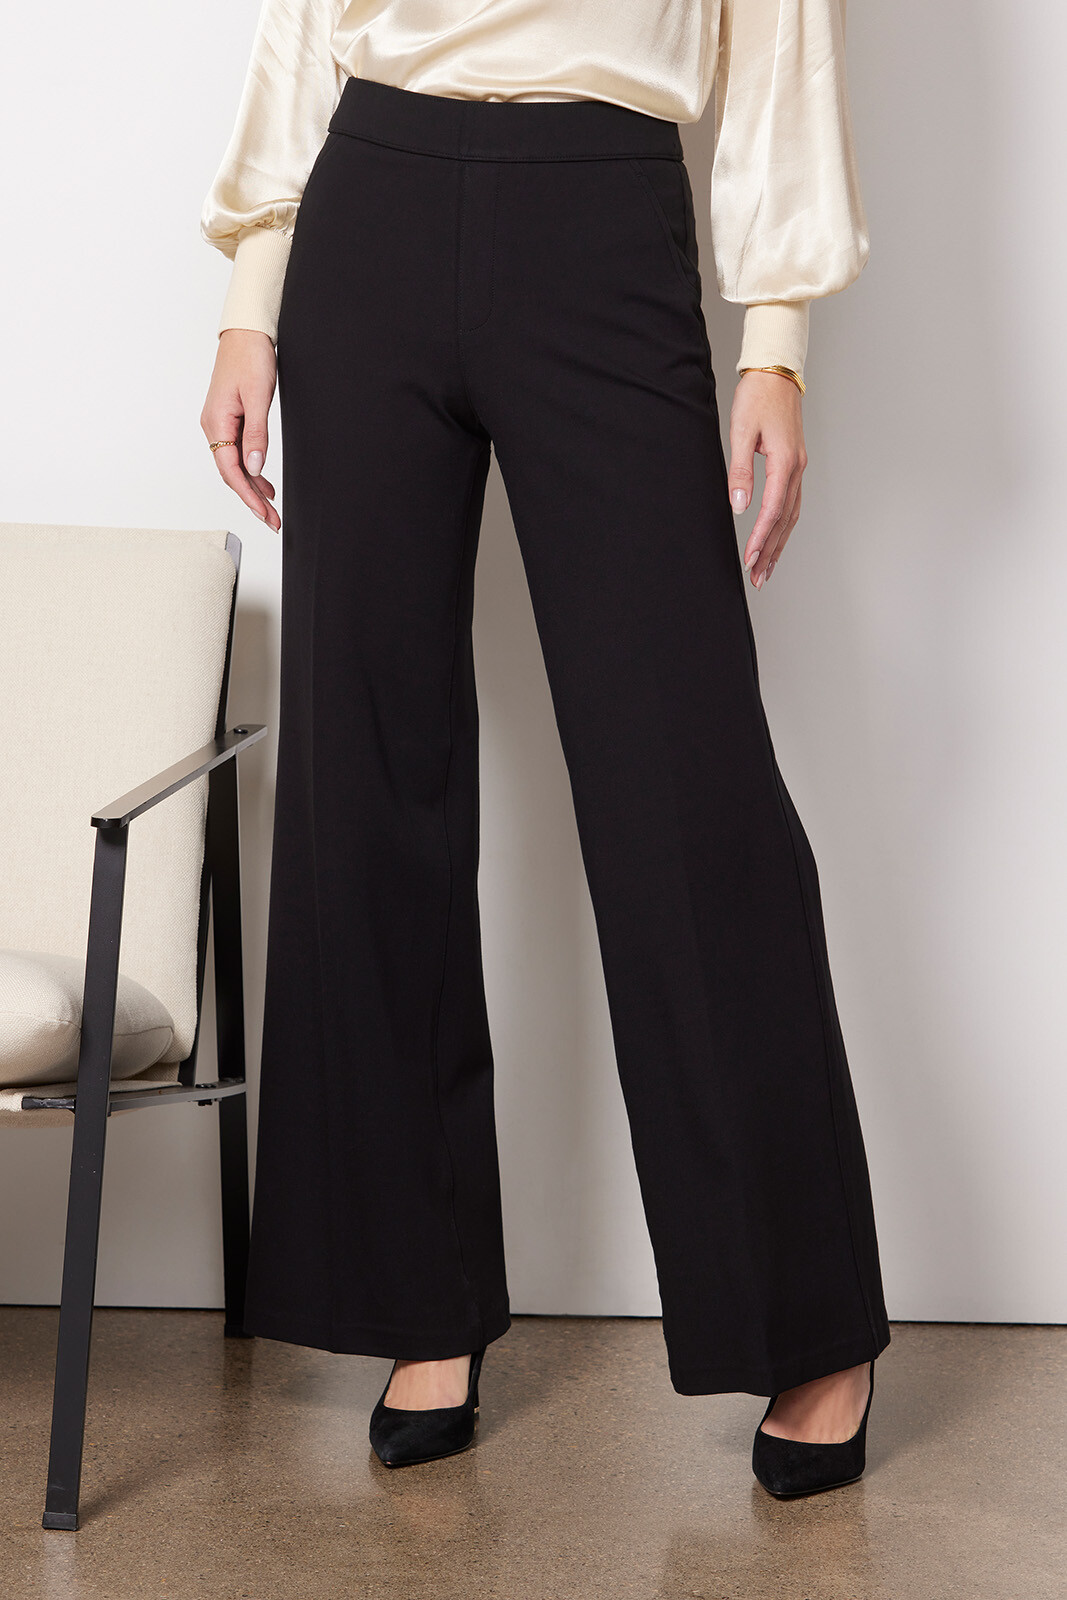 An honest review of Spanx perfect black pants  Cheryl Shops